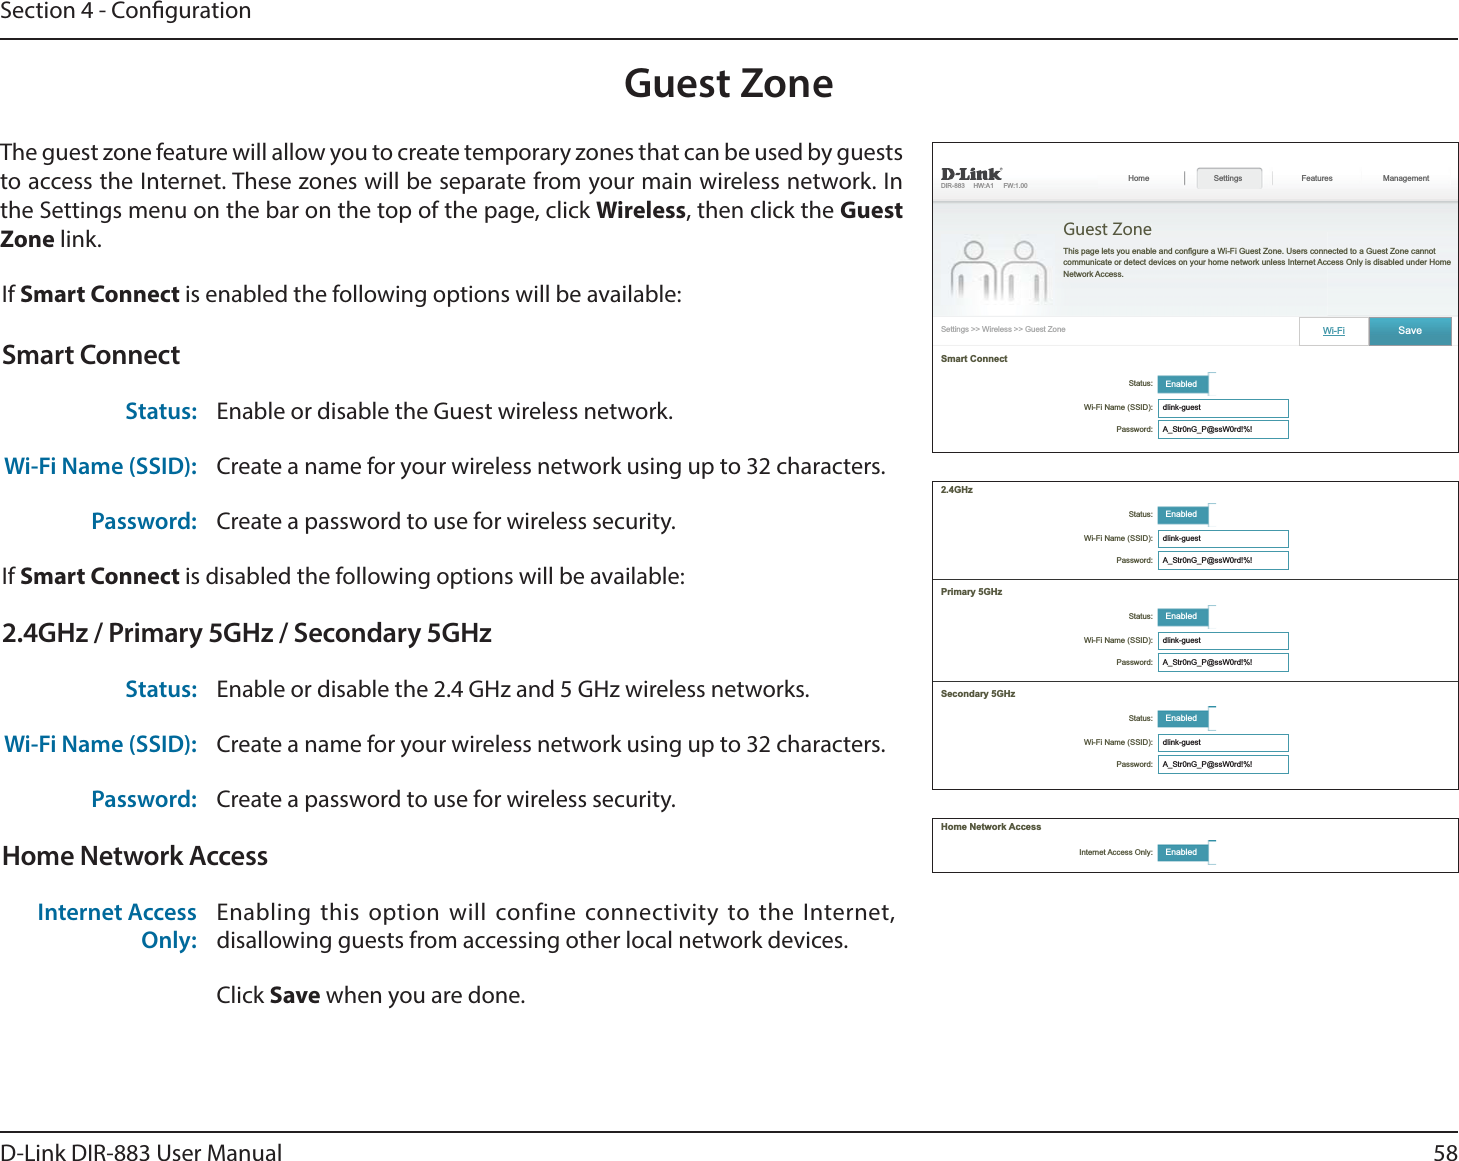 58D-Link DIR-883 User ManualSection 4 - CongurationGuest ZoneThe guest zone feature will allow you to create temporary zones that can be used by guests to access the Internet. These zones will be separate from your main wireless network. In the Settings menu on the bar on the top of the page, click Wireless, then click the Guest Zone link.If Smart Connect is enabled the following options will be available:Smart ConnectStatus: Enable or disable the Guest wireless network.Wi-Fi Name (SSID): Create a name for your wireless network using up to 32 characters. Password: Create a password to use for wireless security. If Smart Connect is disabled the following options will be available:2.4GHz / Primary 5GHz / Secondary 5GHzStatus: Enable or disable the 2.4 GHz and 5 GHz wireless networks.Wi-Fi Name (SSID): Create a name for your wireless network using up to 32 characters. Password: Create a password to use for wireless security. Home Network AccessInternet Access Only:Enabling this option will confine connectivity to the Internet, disallowing guests from accessing other local network devices.Click Save when you are done.  Guest ZoneFeatures ManagementGuest Zone Enabled Password: Wi-Fi Internet Access Only: Enabled2.4GHz Enabled Password:  Enabled Password:  Enabled Password: 